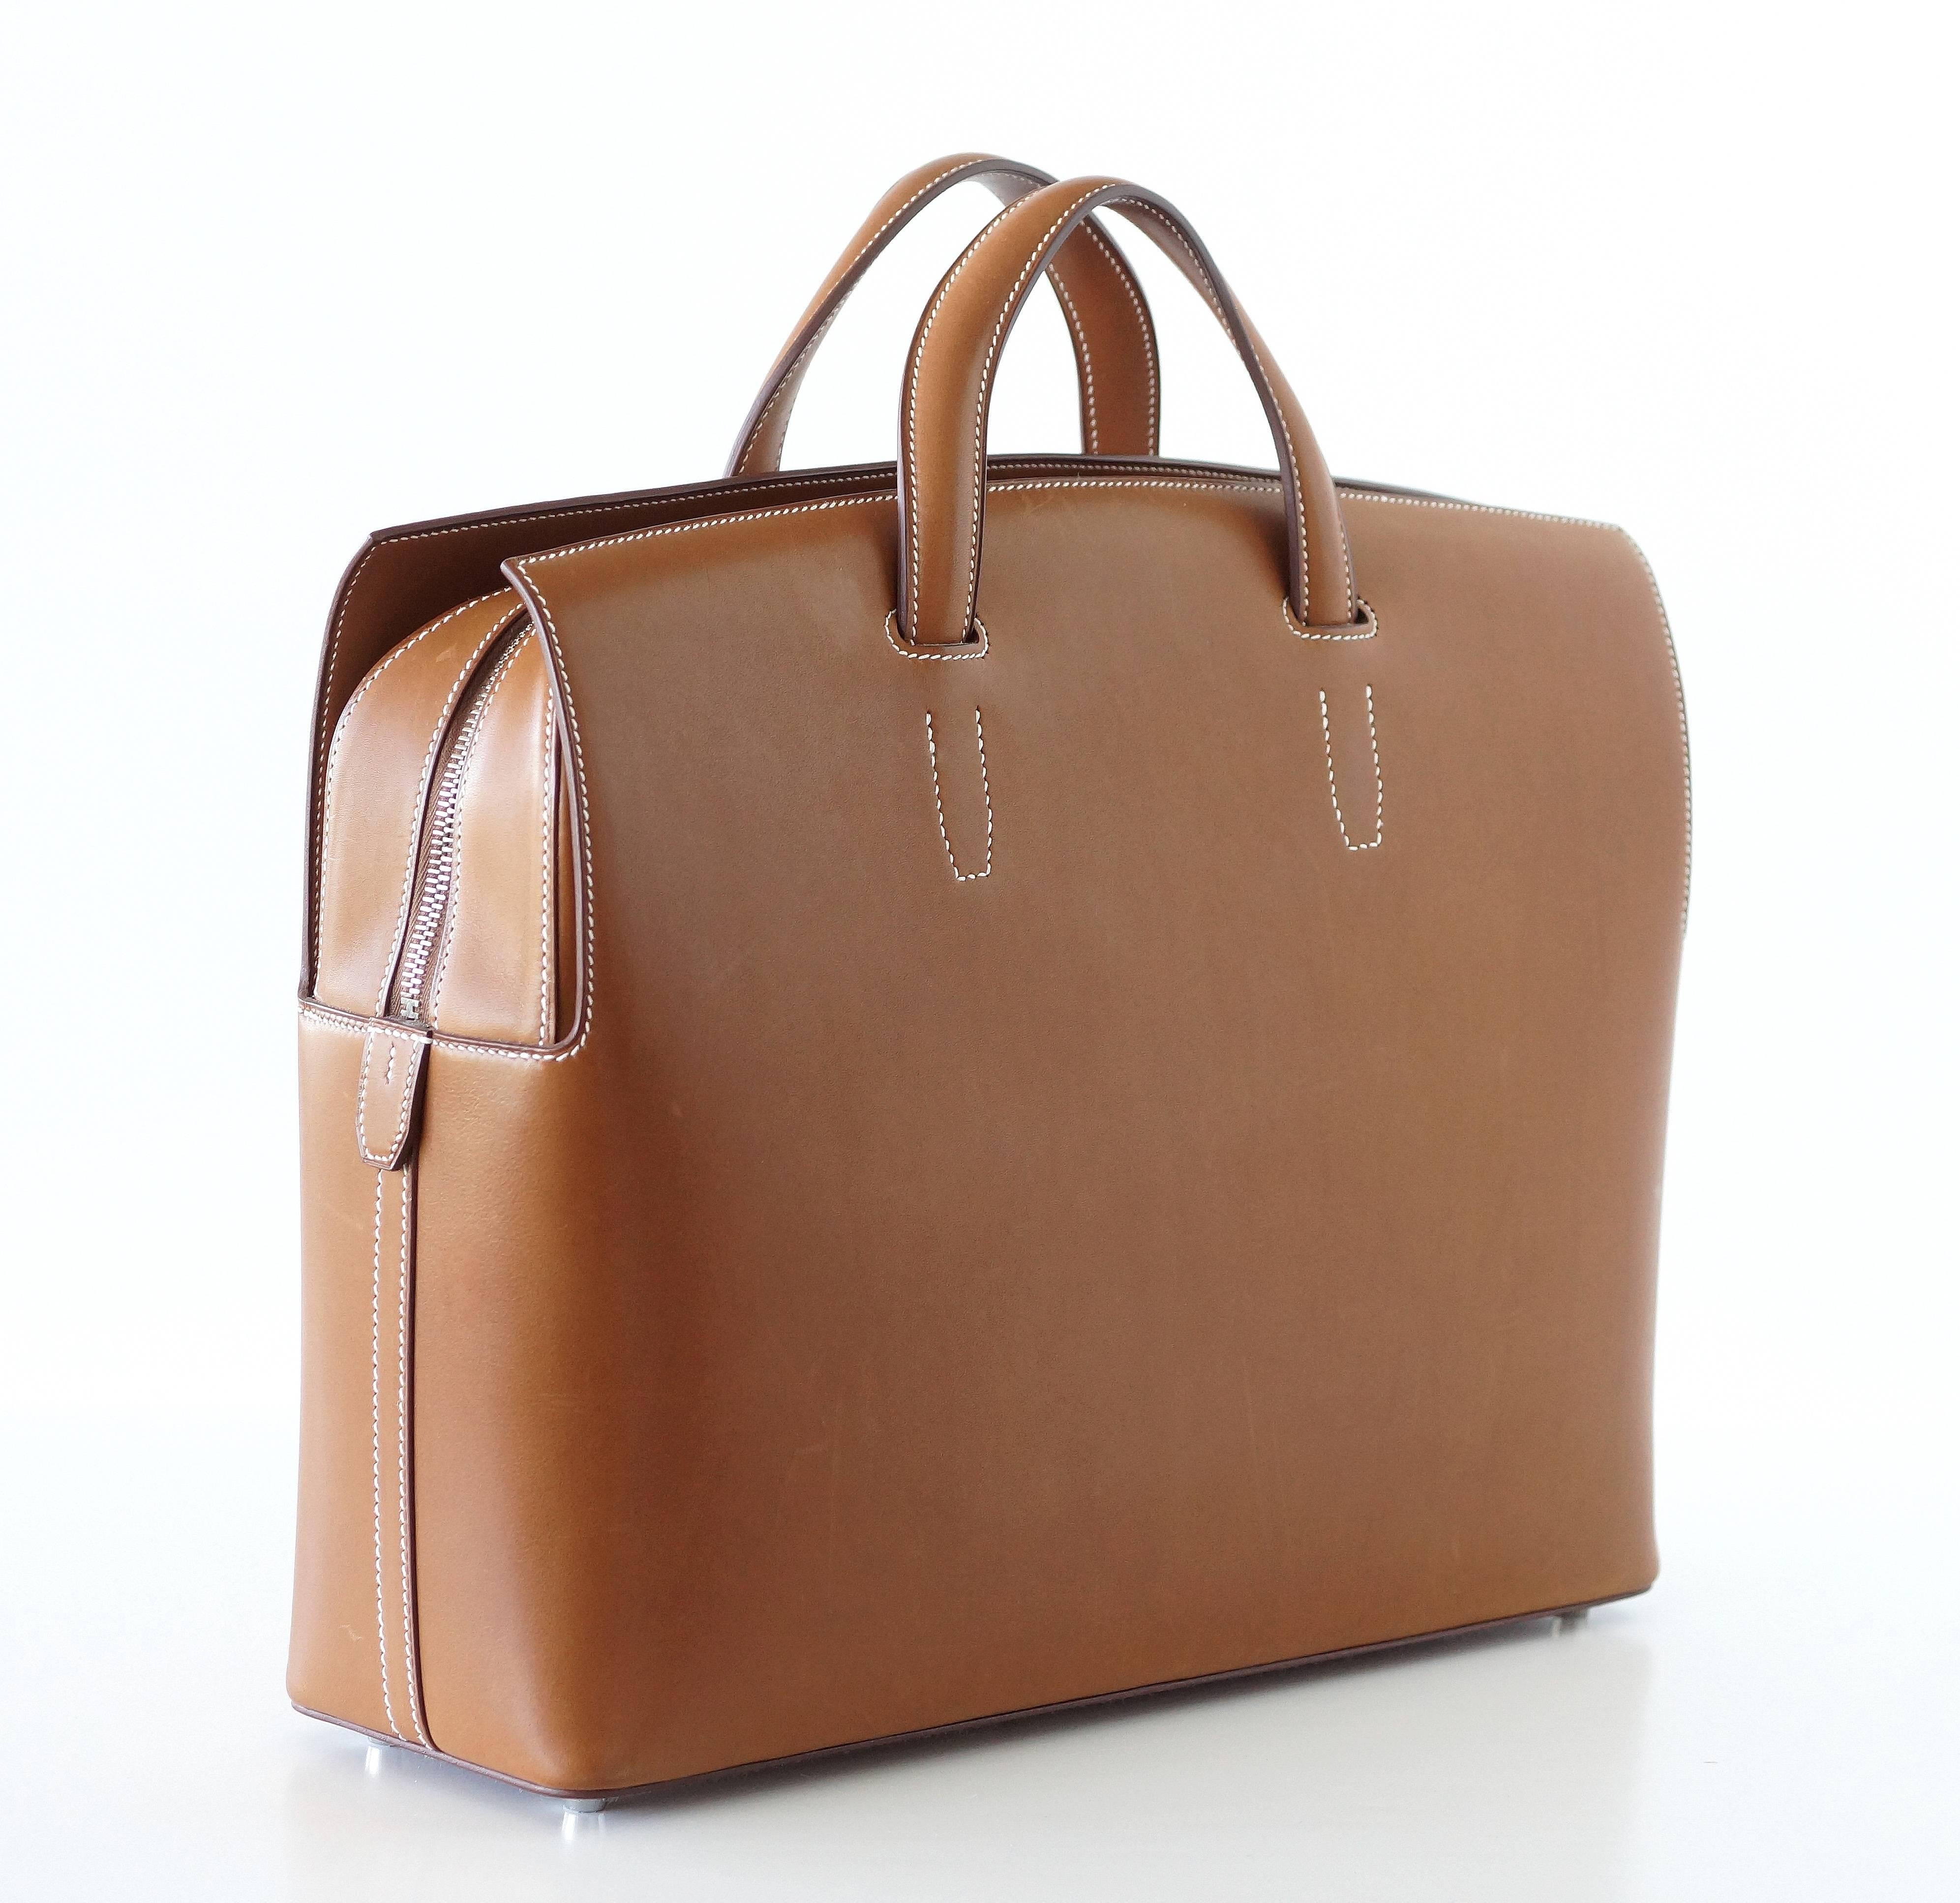 City Hall Porte-Document 38cm briefcase.
Exquisite in fauve with veau barenia leather. 
White top stitch provides handsome contrast.
Palladium hardware. 
Top zip with pockets on either side.
Interior has 3 large slot pockets.
Five palladium feet